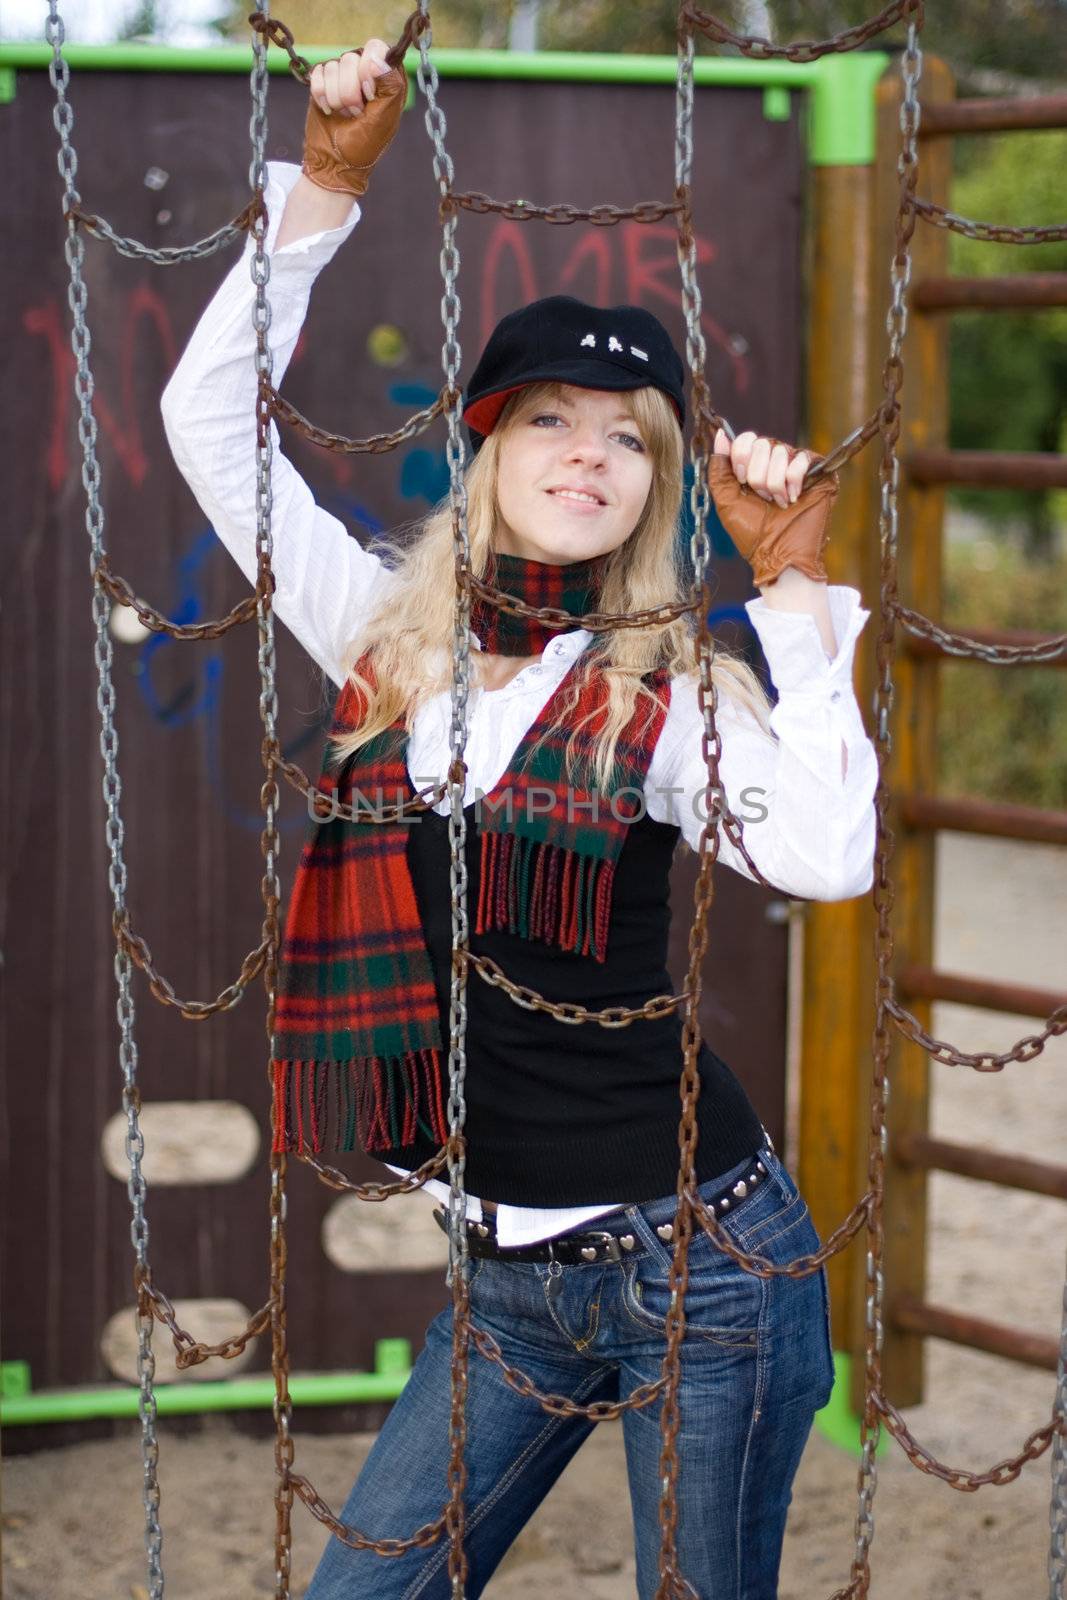 Young girl behind the chains on a playground